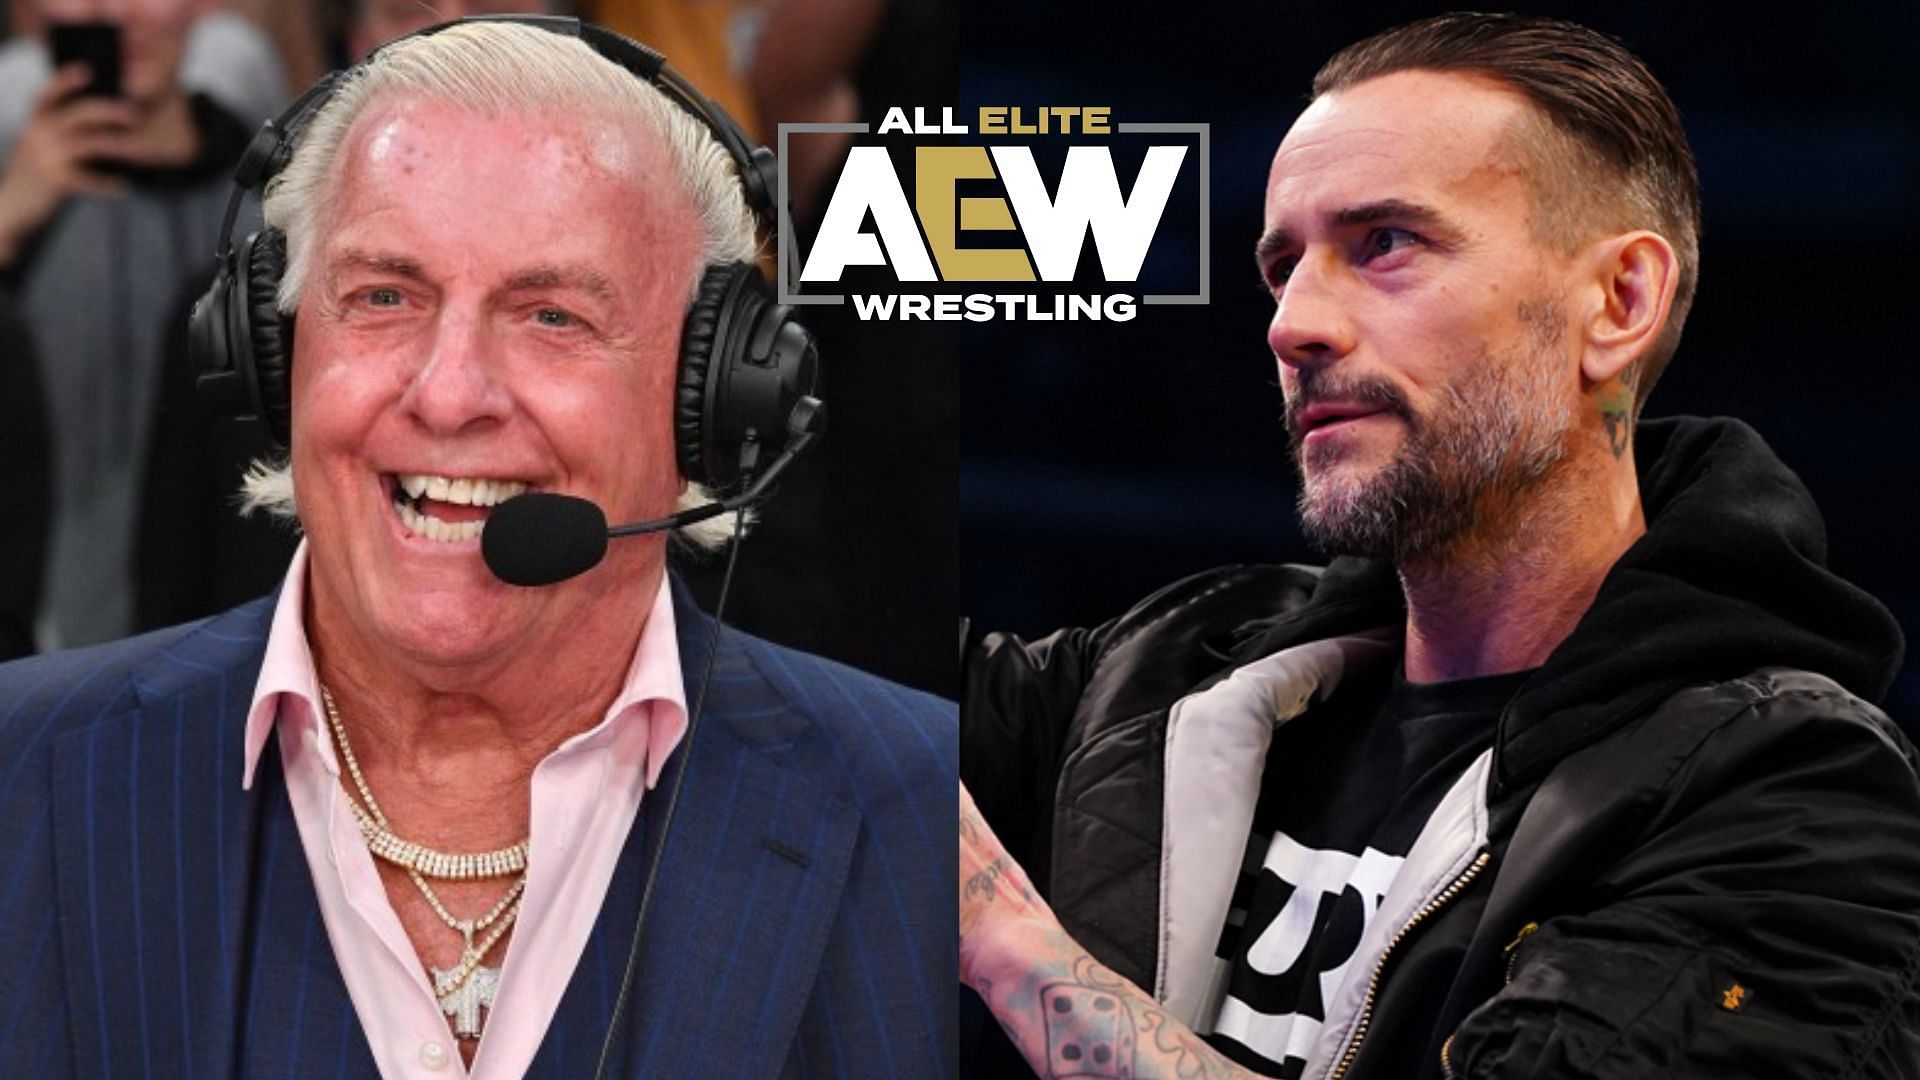 Ric Flair claims to know something about CM Punk